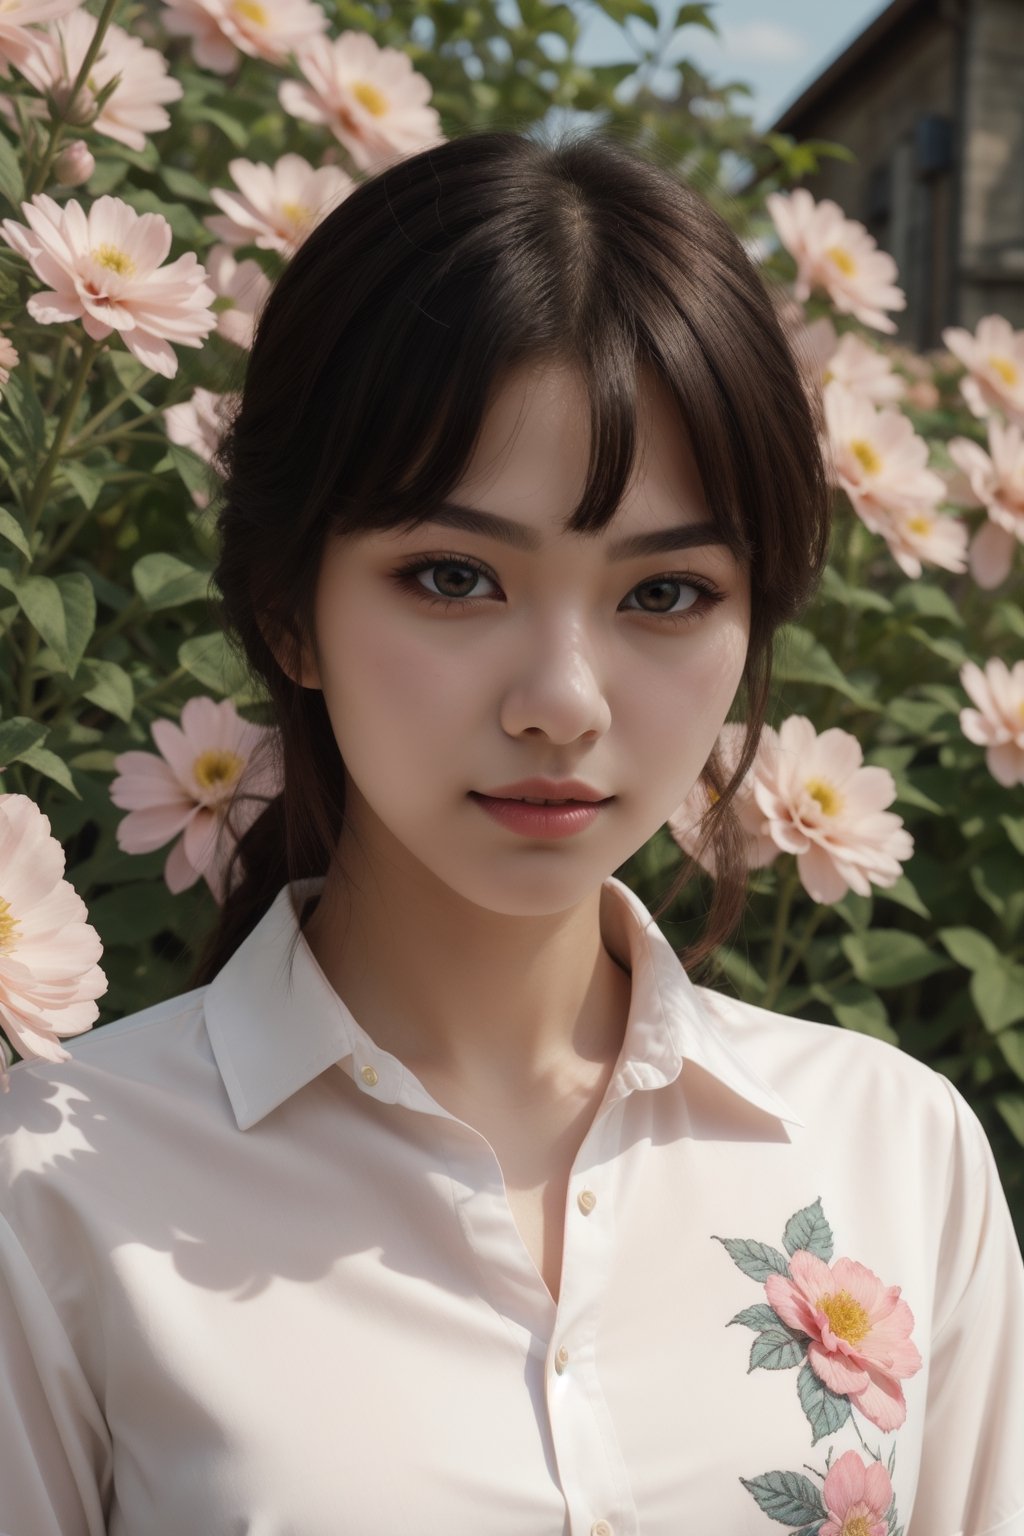 1 girl, solo, detailed eyes, blink and youll miss it detail, silk shirt, outdoors, flower garden, high quality, floral background, very detailed,wonder beauty ,Enhance,JeeSoo 